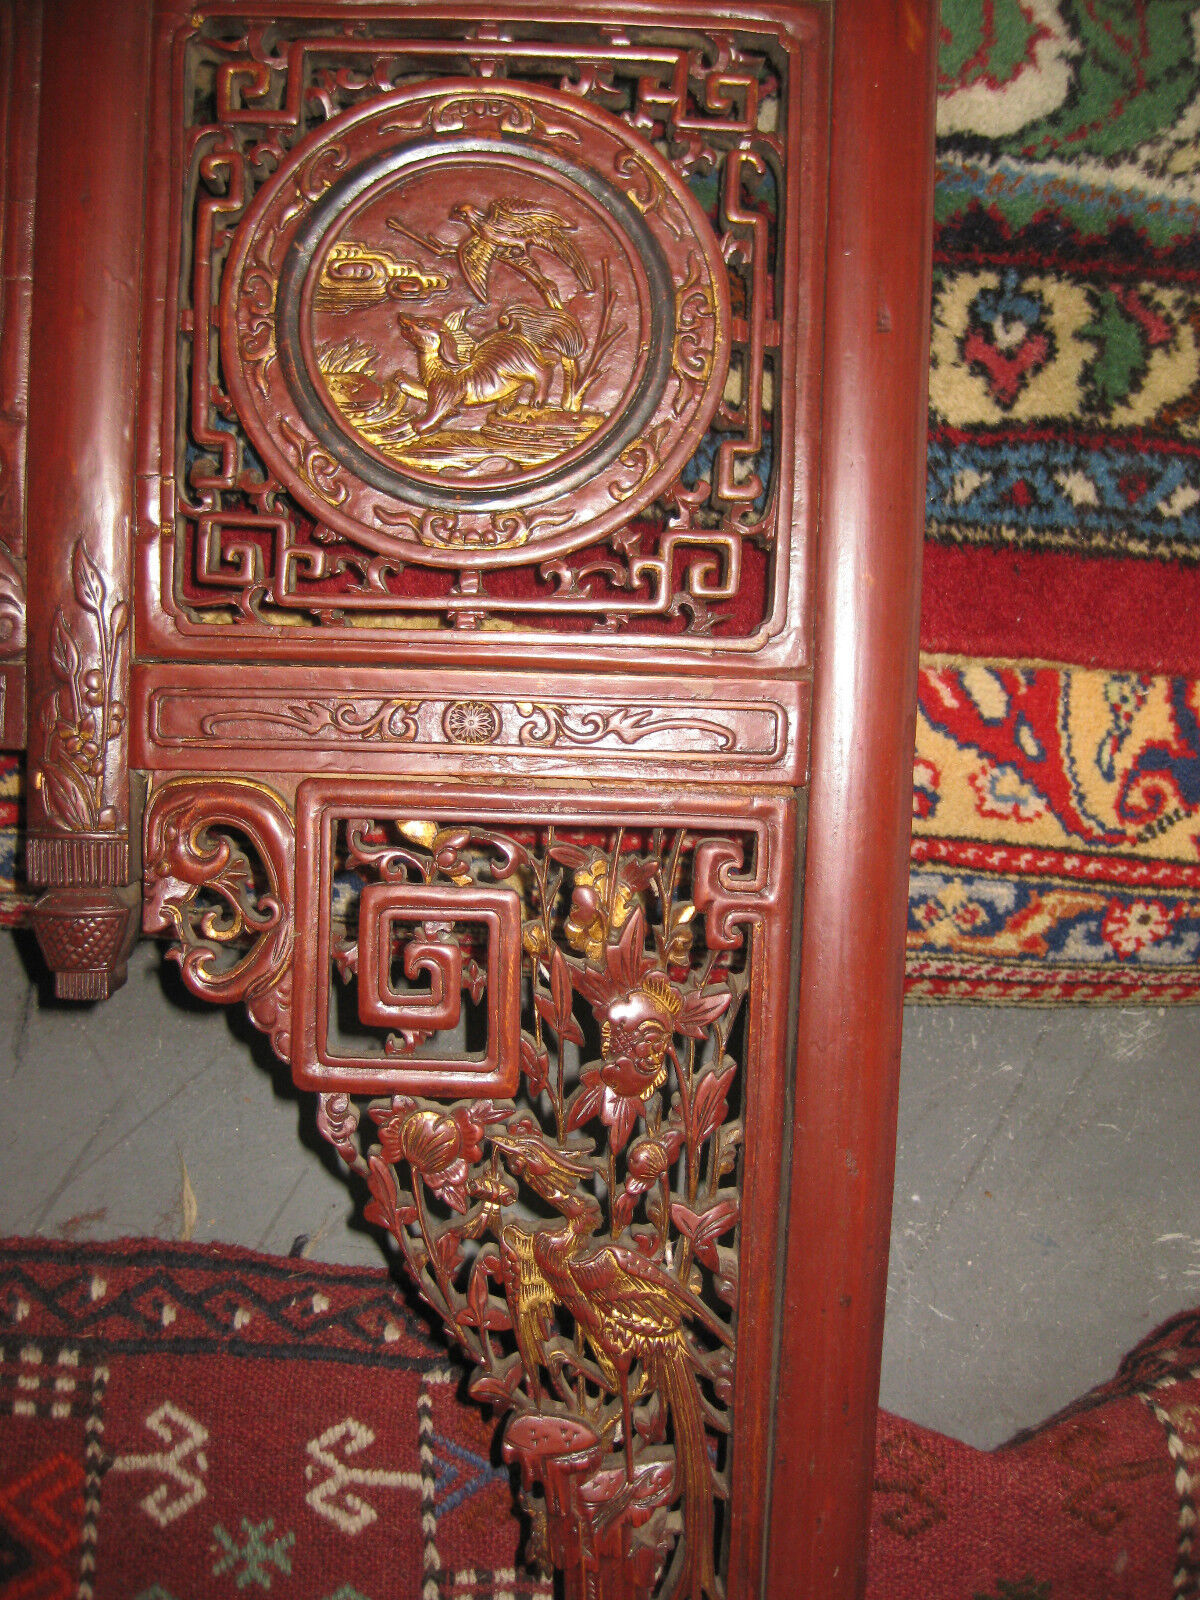 Chinese antique carved wood canope of opium or wedding  bed, Qing dynasty Без бренда - фотография #10